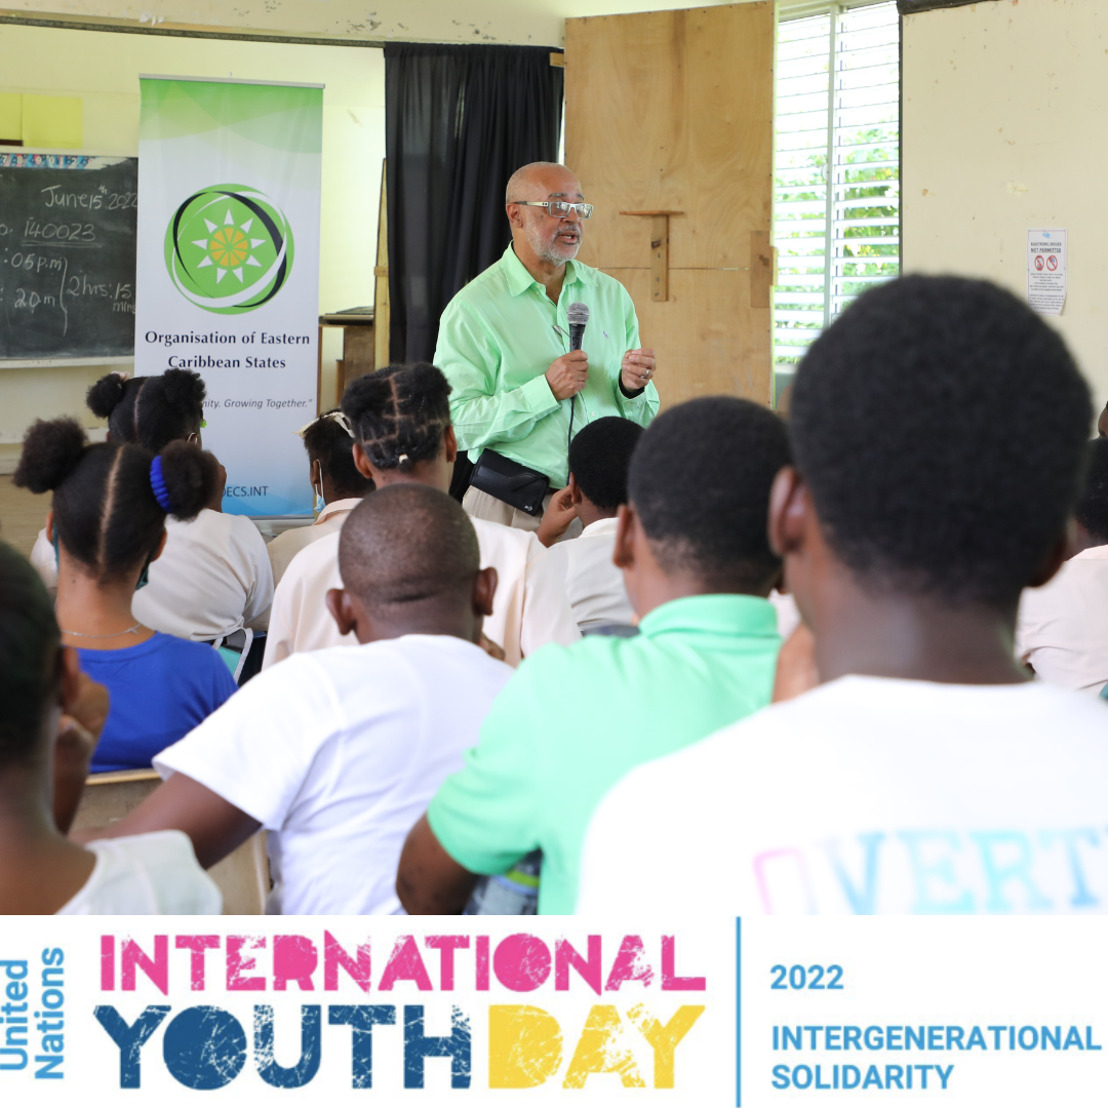 OECS Director General calls for Youth to be at epicenter of our development in International Youth Day Address